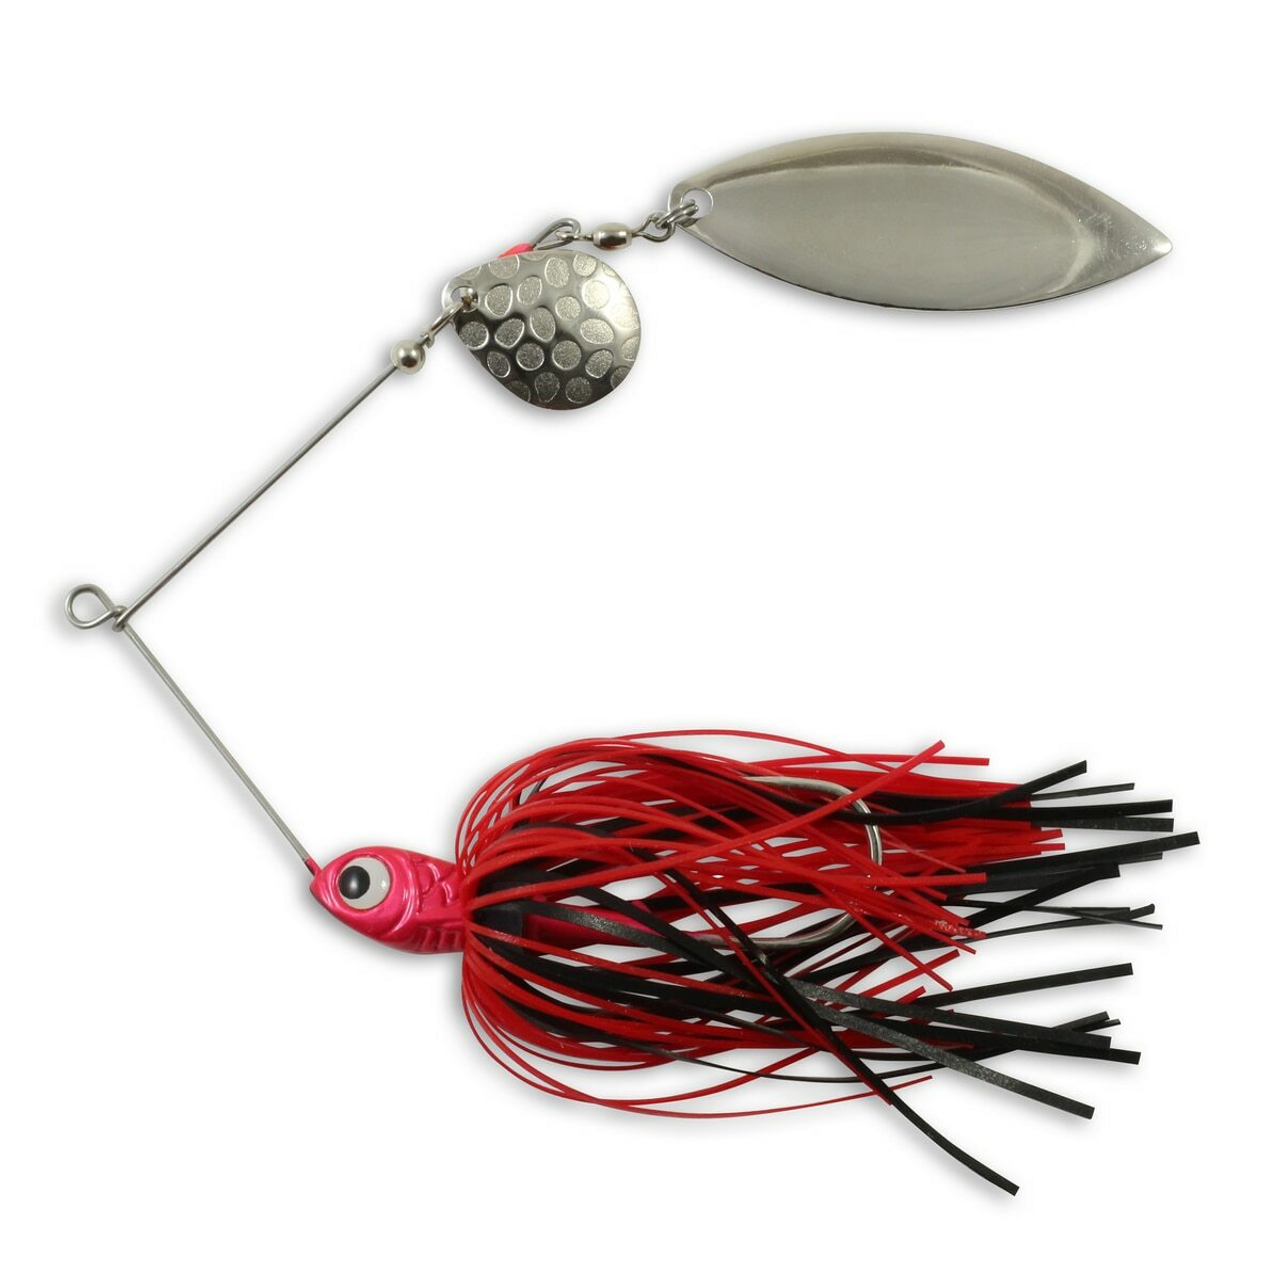 Northland Reed-Runner Tandem Spin, 1/4 oz, Red Shad